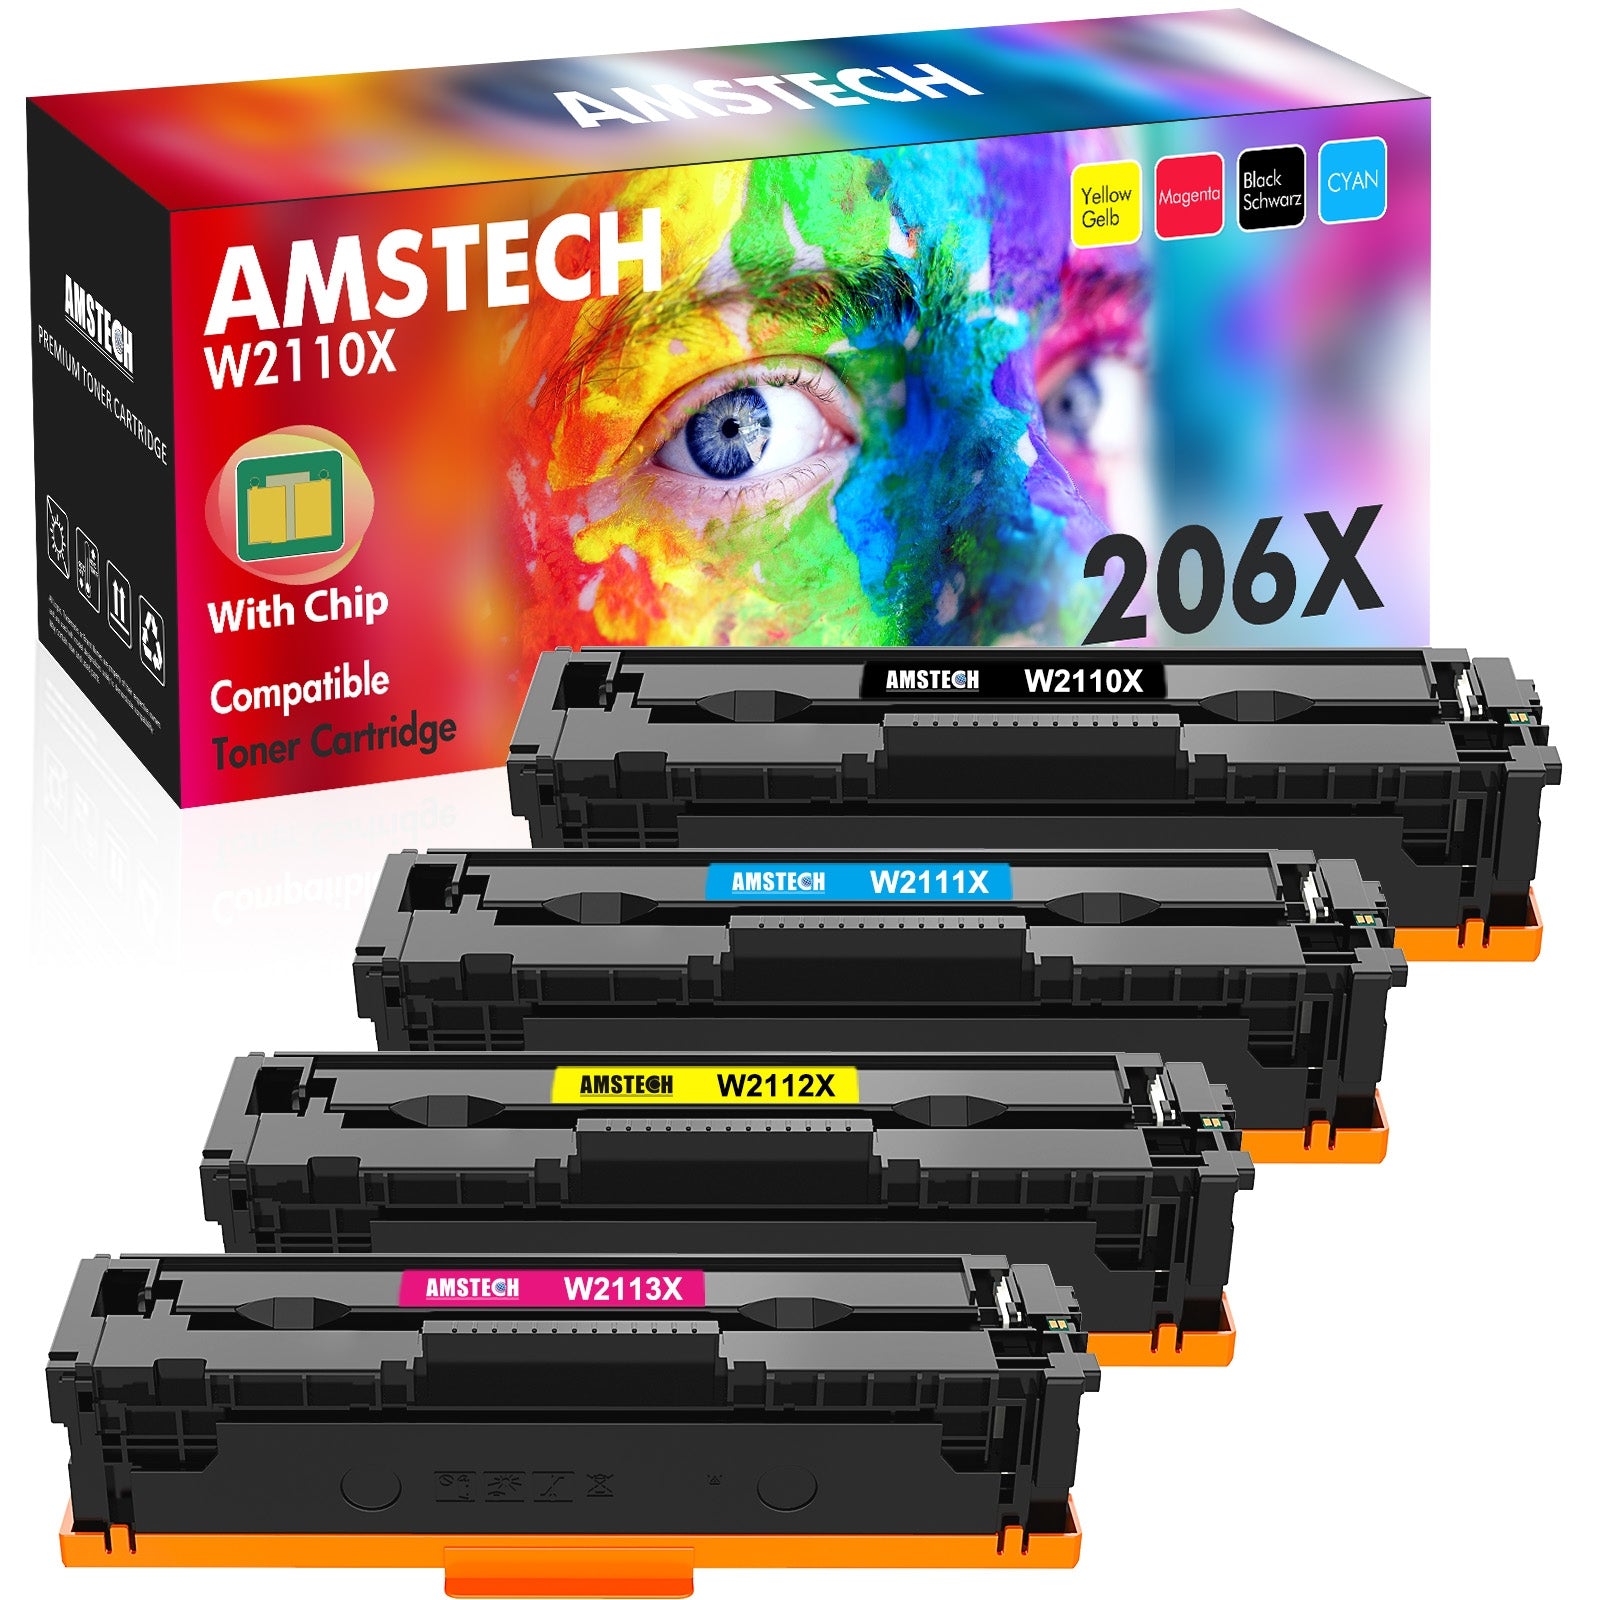 206X 206A Toner Cartridges 4 Pack High Yield (with Chip) Compatible Replacement for 206X 206A W2110X W2110A Color MFP M283fdw M283cdw M283 Pro M255dw M255 Printer Ink (Black Cyan Yellow Magenta)